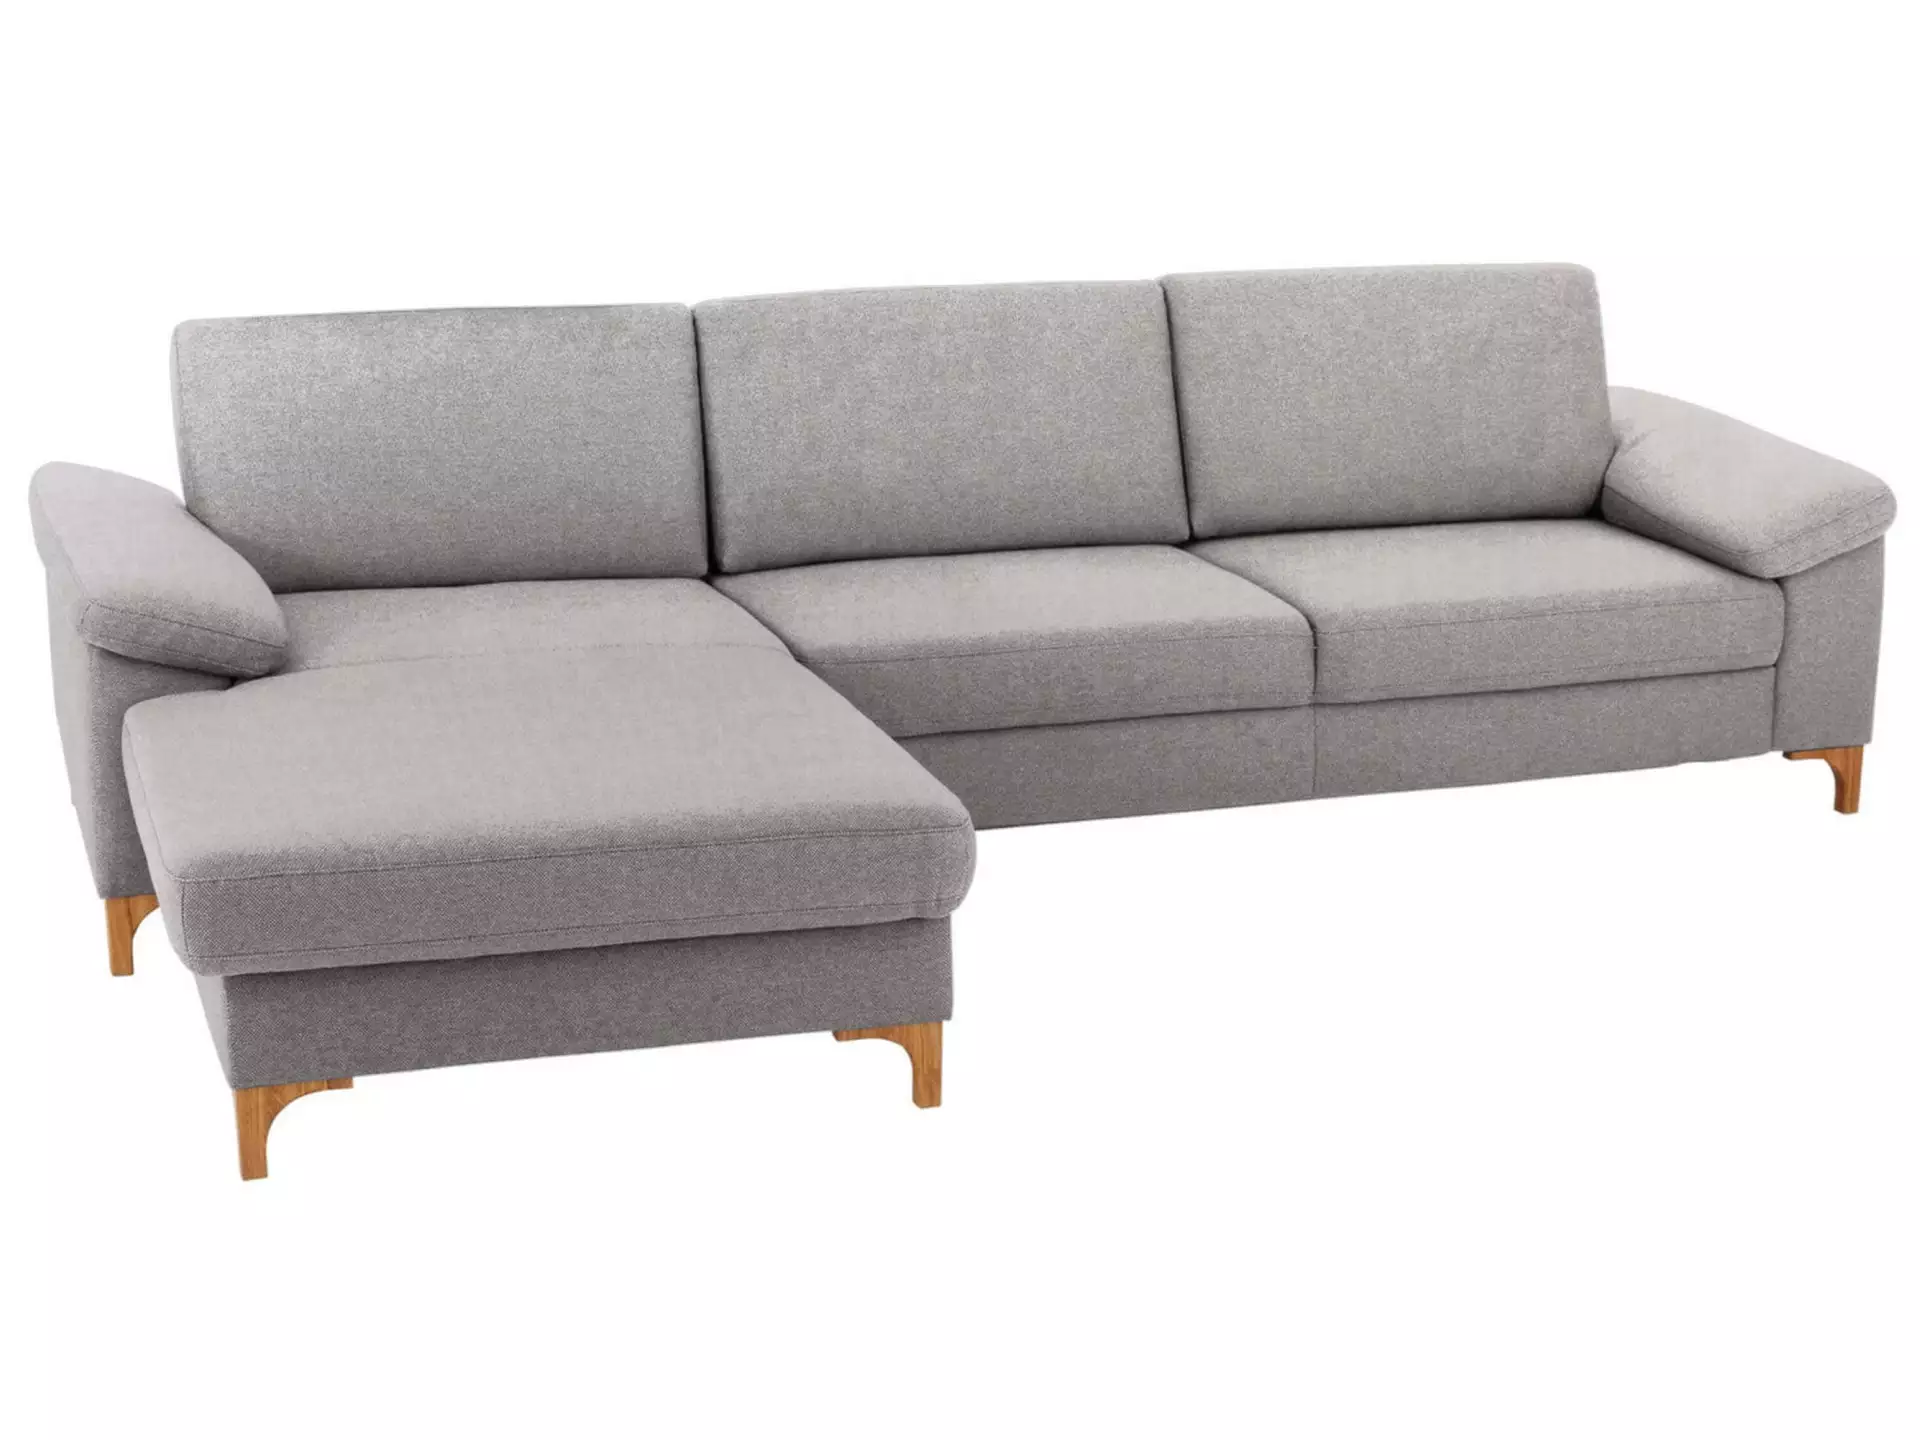 Ecksofa Coventry Basic Candy / Farbe: Silver / Material: Stoff Basic